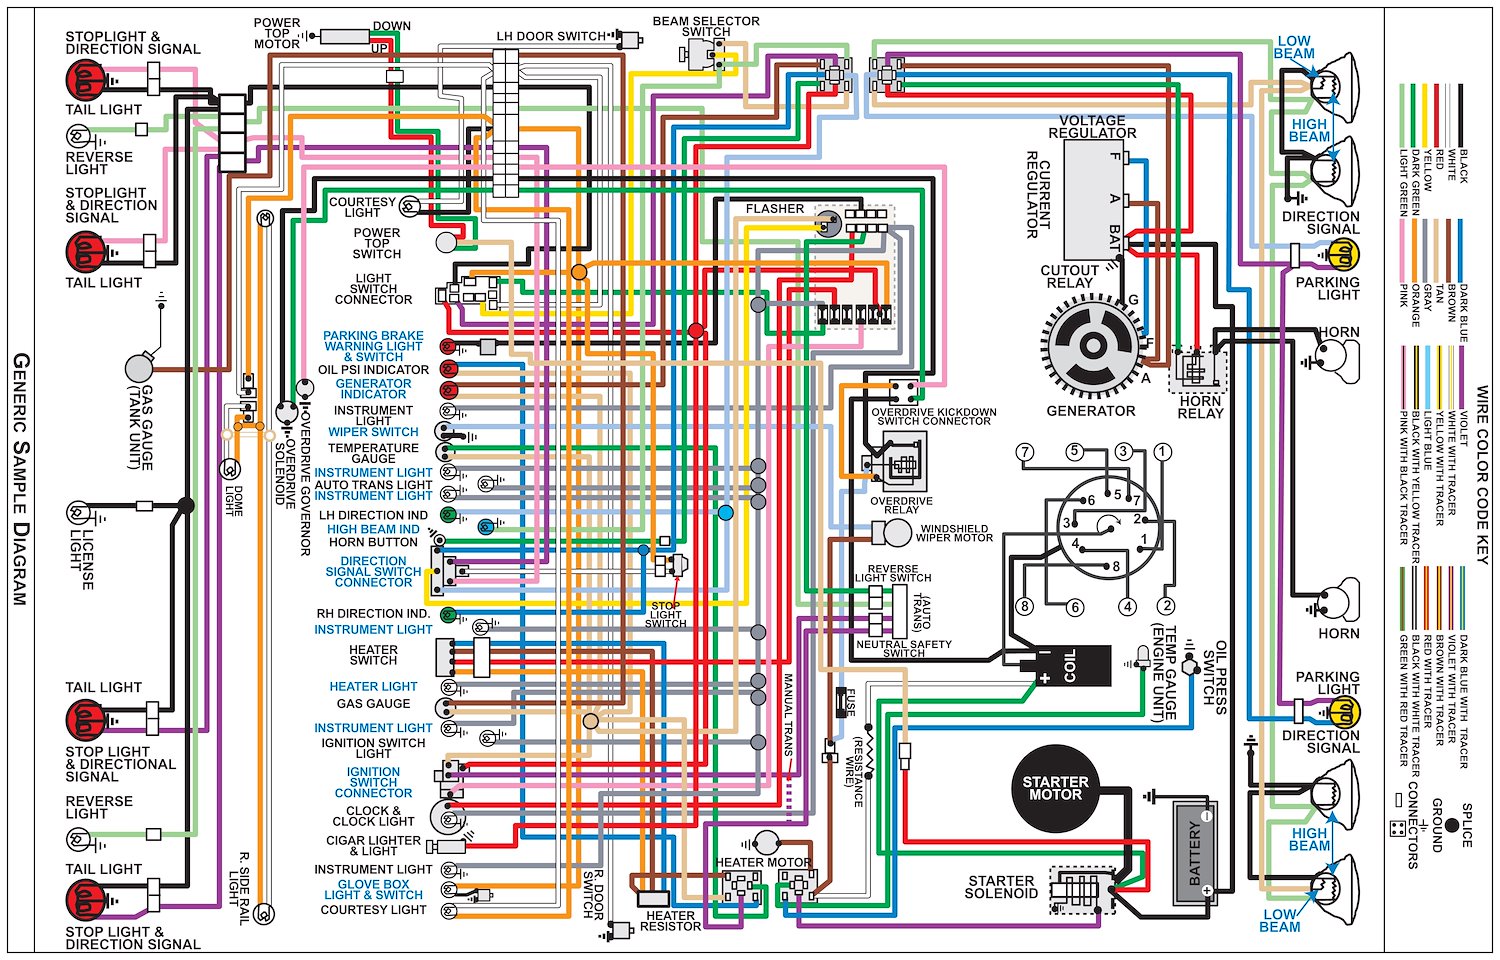 Wiring Diagram for 1970 Plymouth Barracuda with HEMI